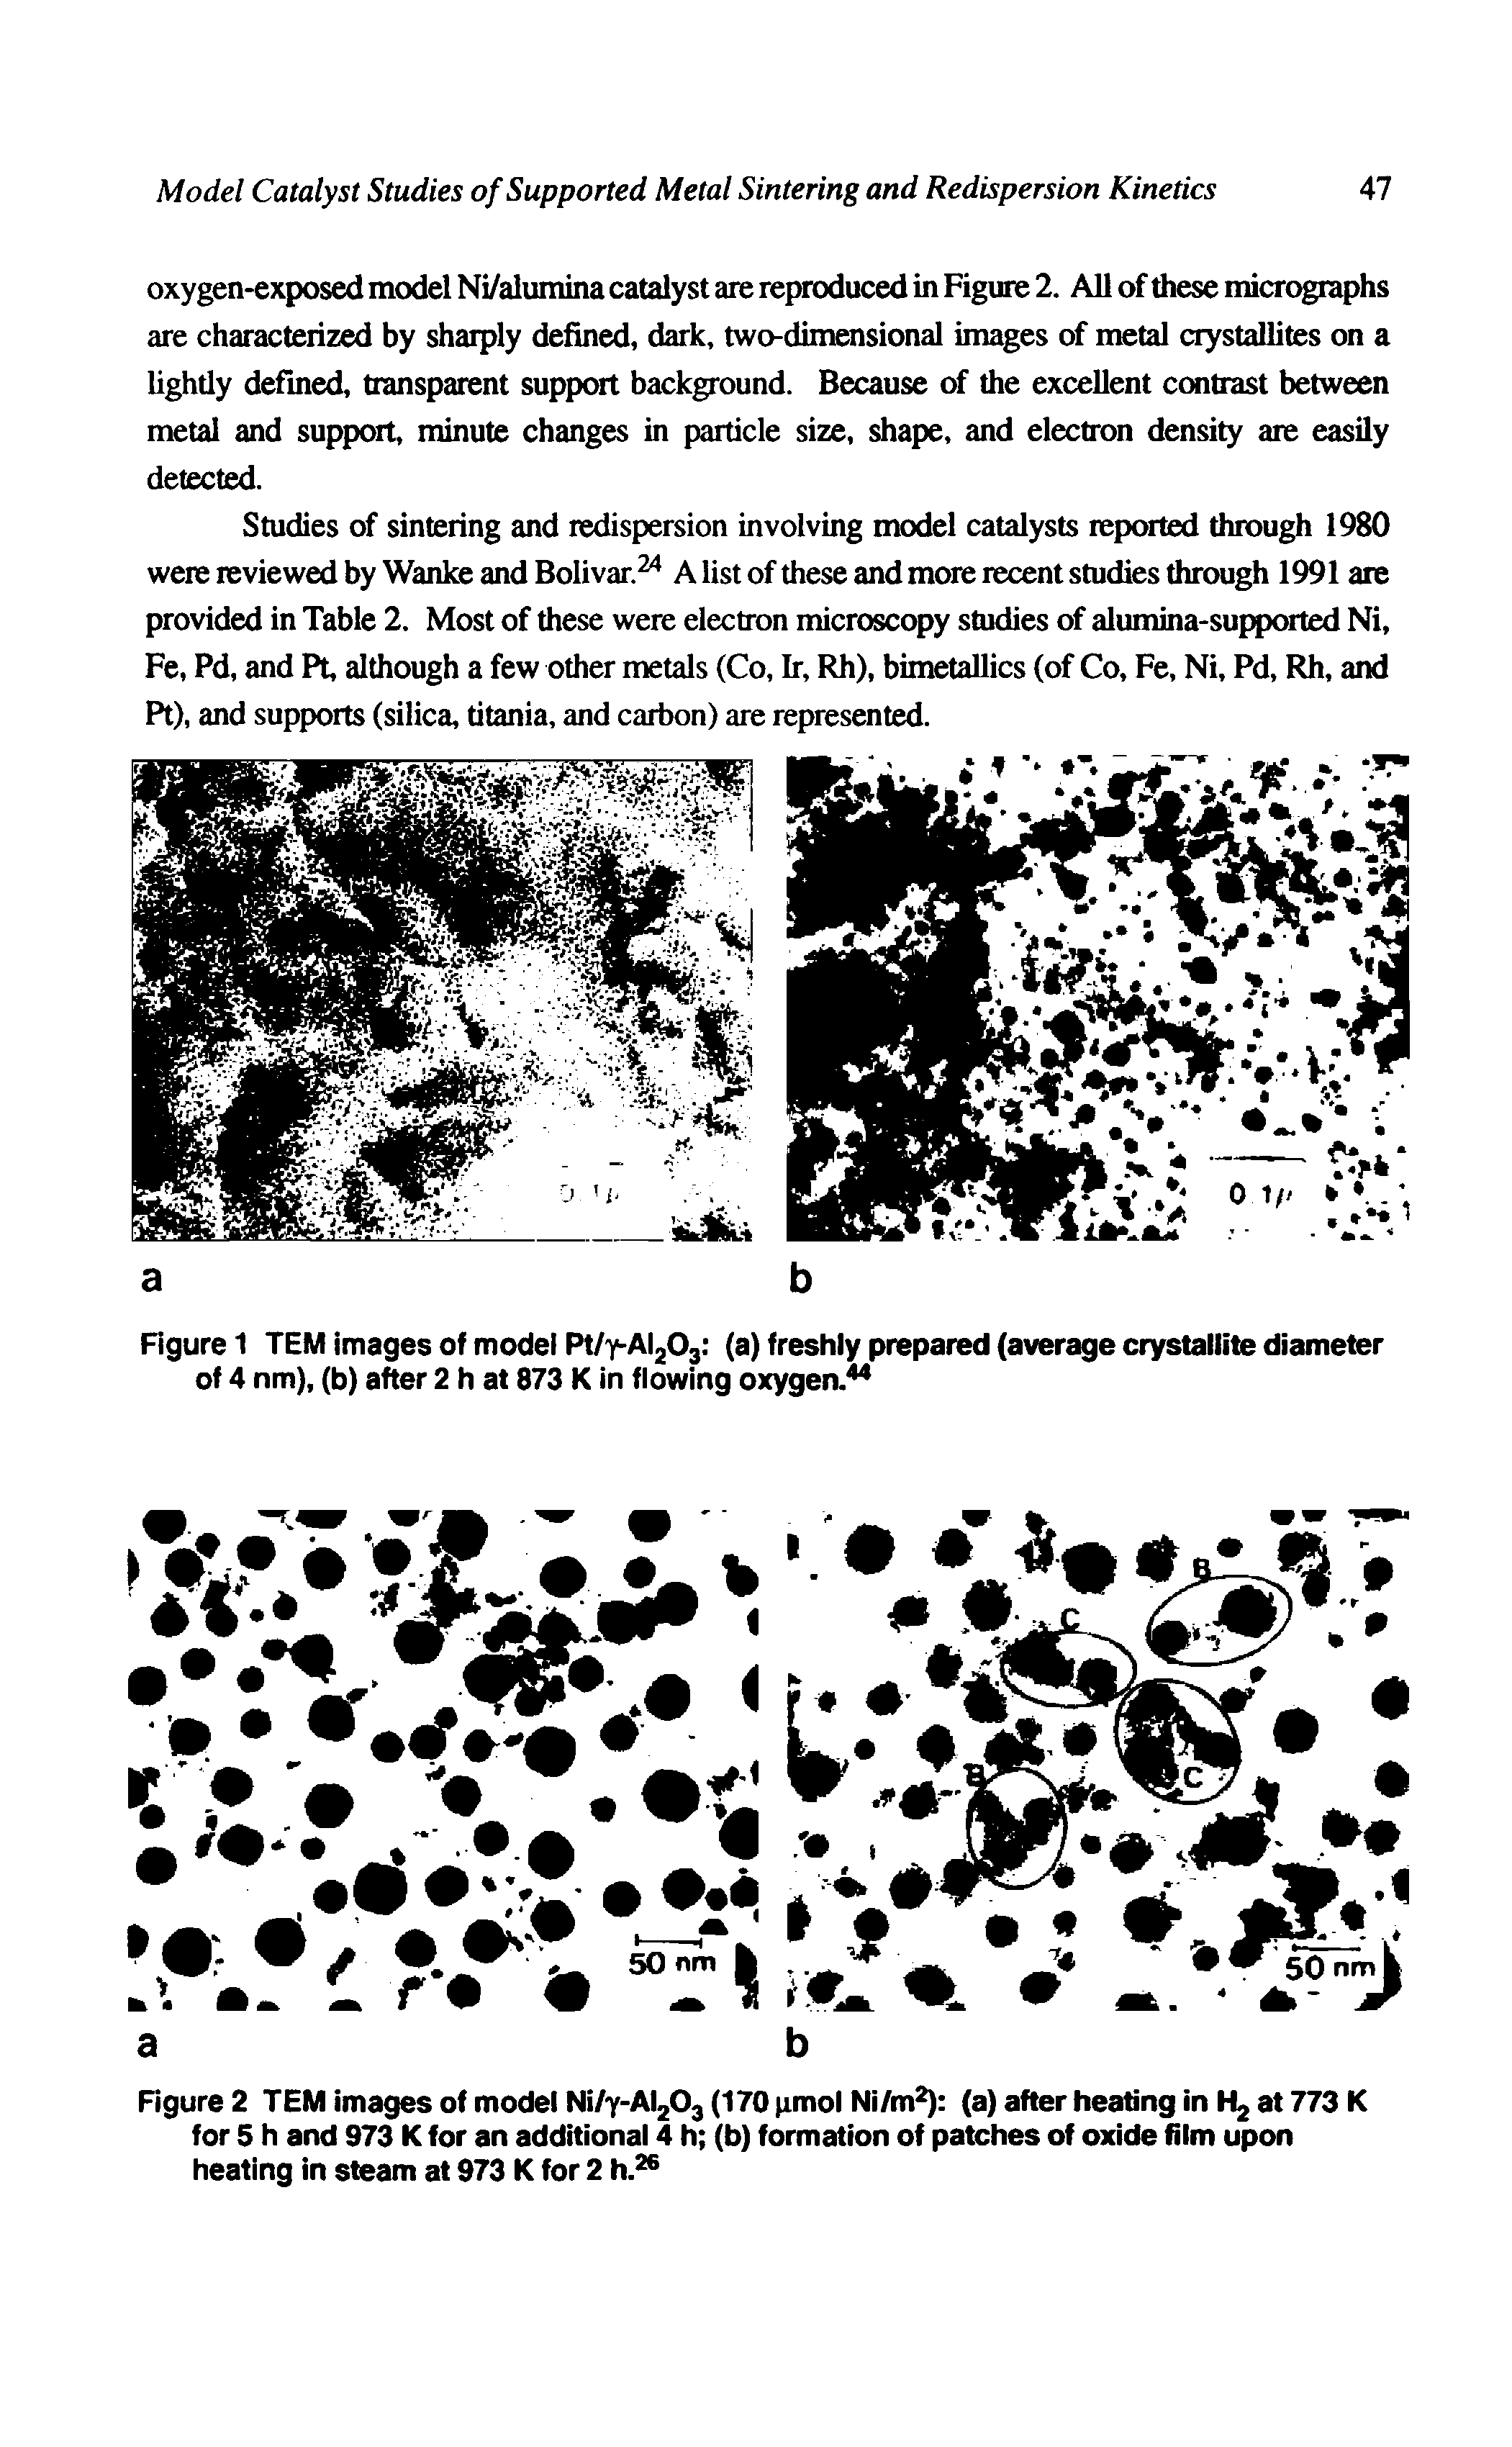 Figure 2 TEM images of model Ni/y-Al203 (170 pmol Ni/m (a) after heating in H2 at 773 K for 5 h and 973 K for an additional 4 h (b) formation of patches of oxide film upon heating in steam at 973 K for 2 h. ...